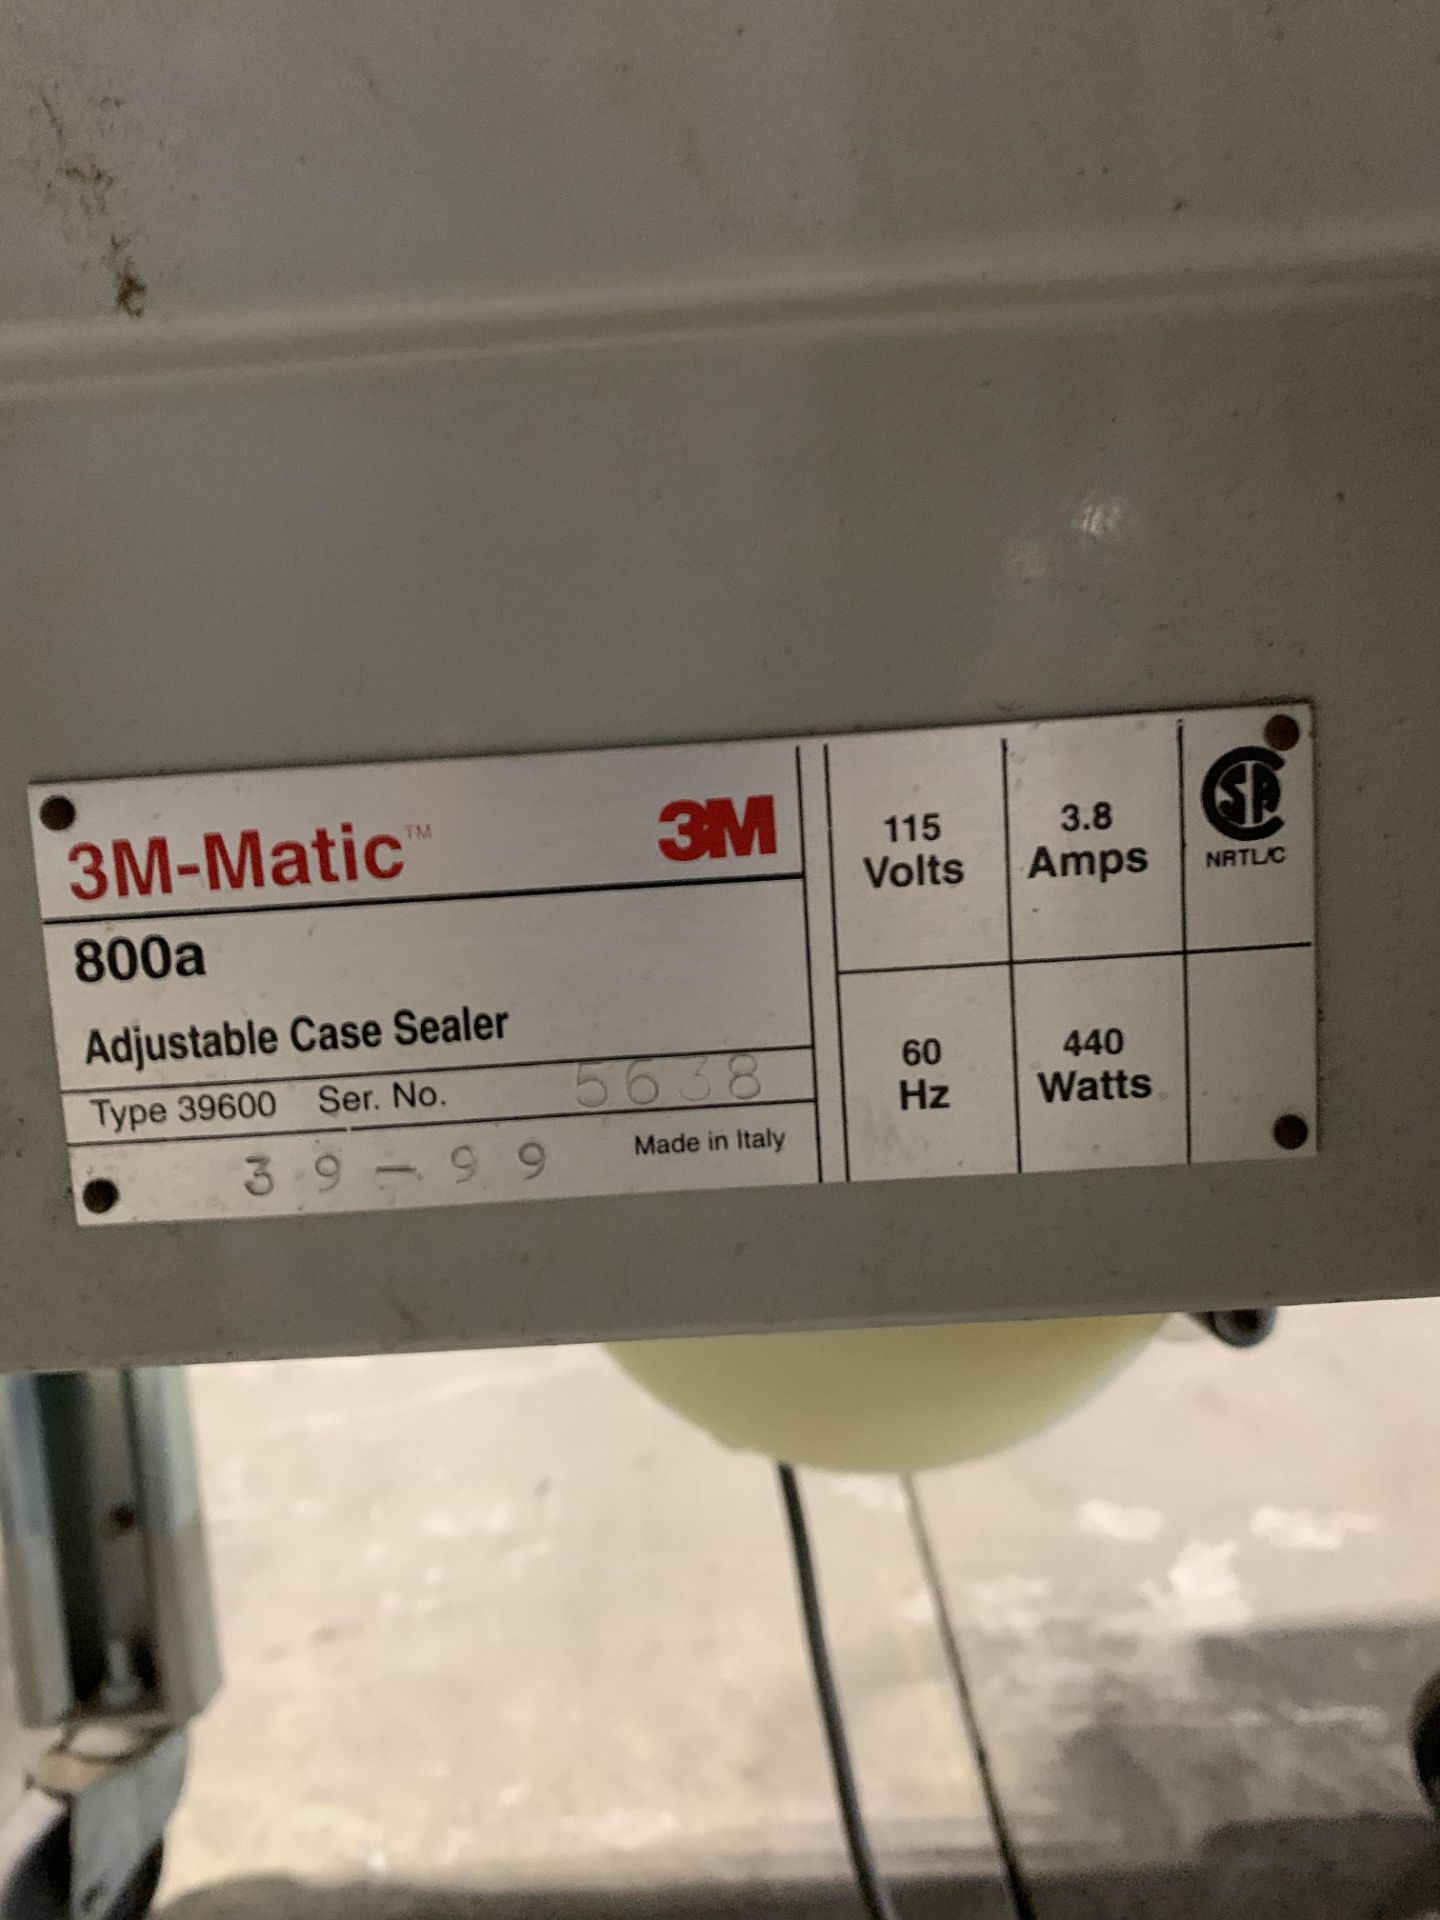 3M-MATIC 800A ADJUSTABLE CASE SEALRES: TYPE 39600 SN 5638 (115V 3.8A 60HZ 440W) - Image 2 of 3